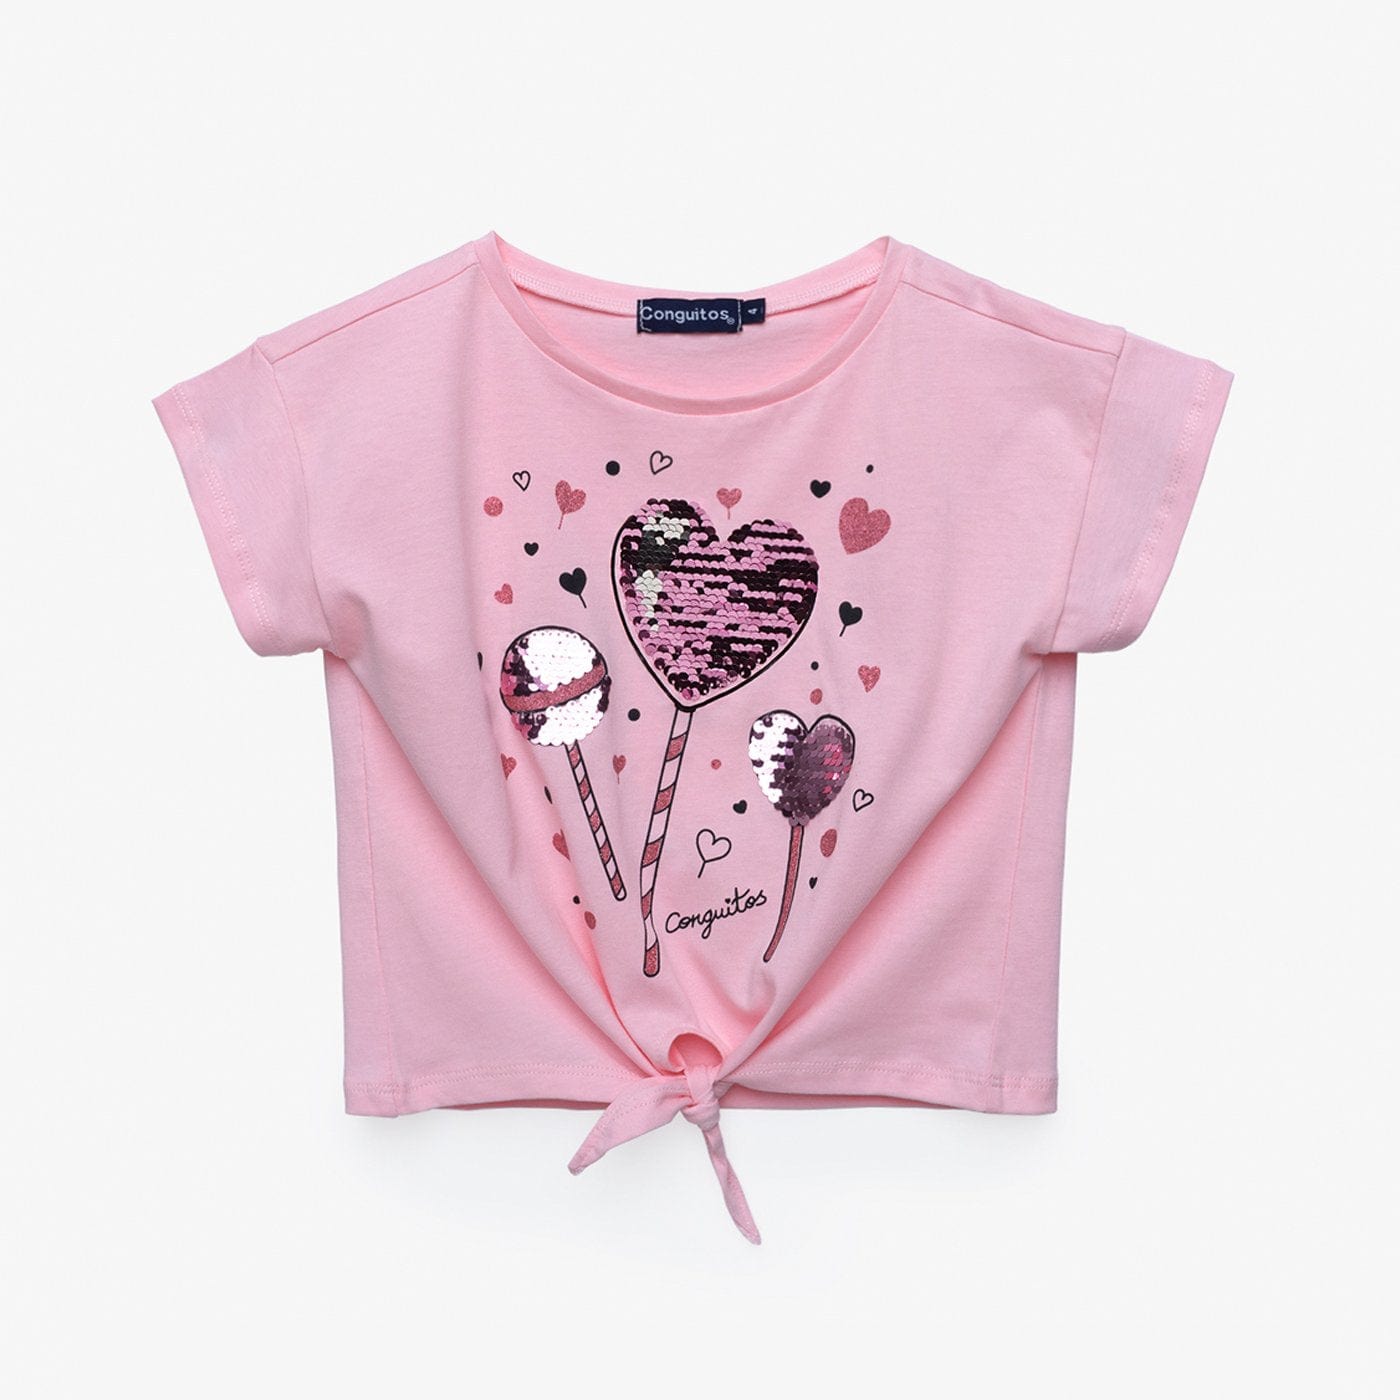 CONGUITOS TEXTIL Clothing Girl's Pink Knotted T-Shirt